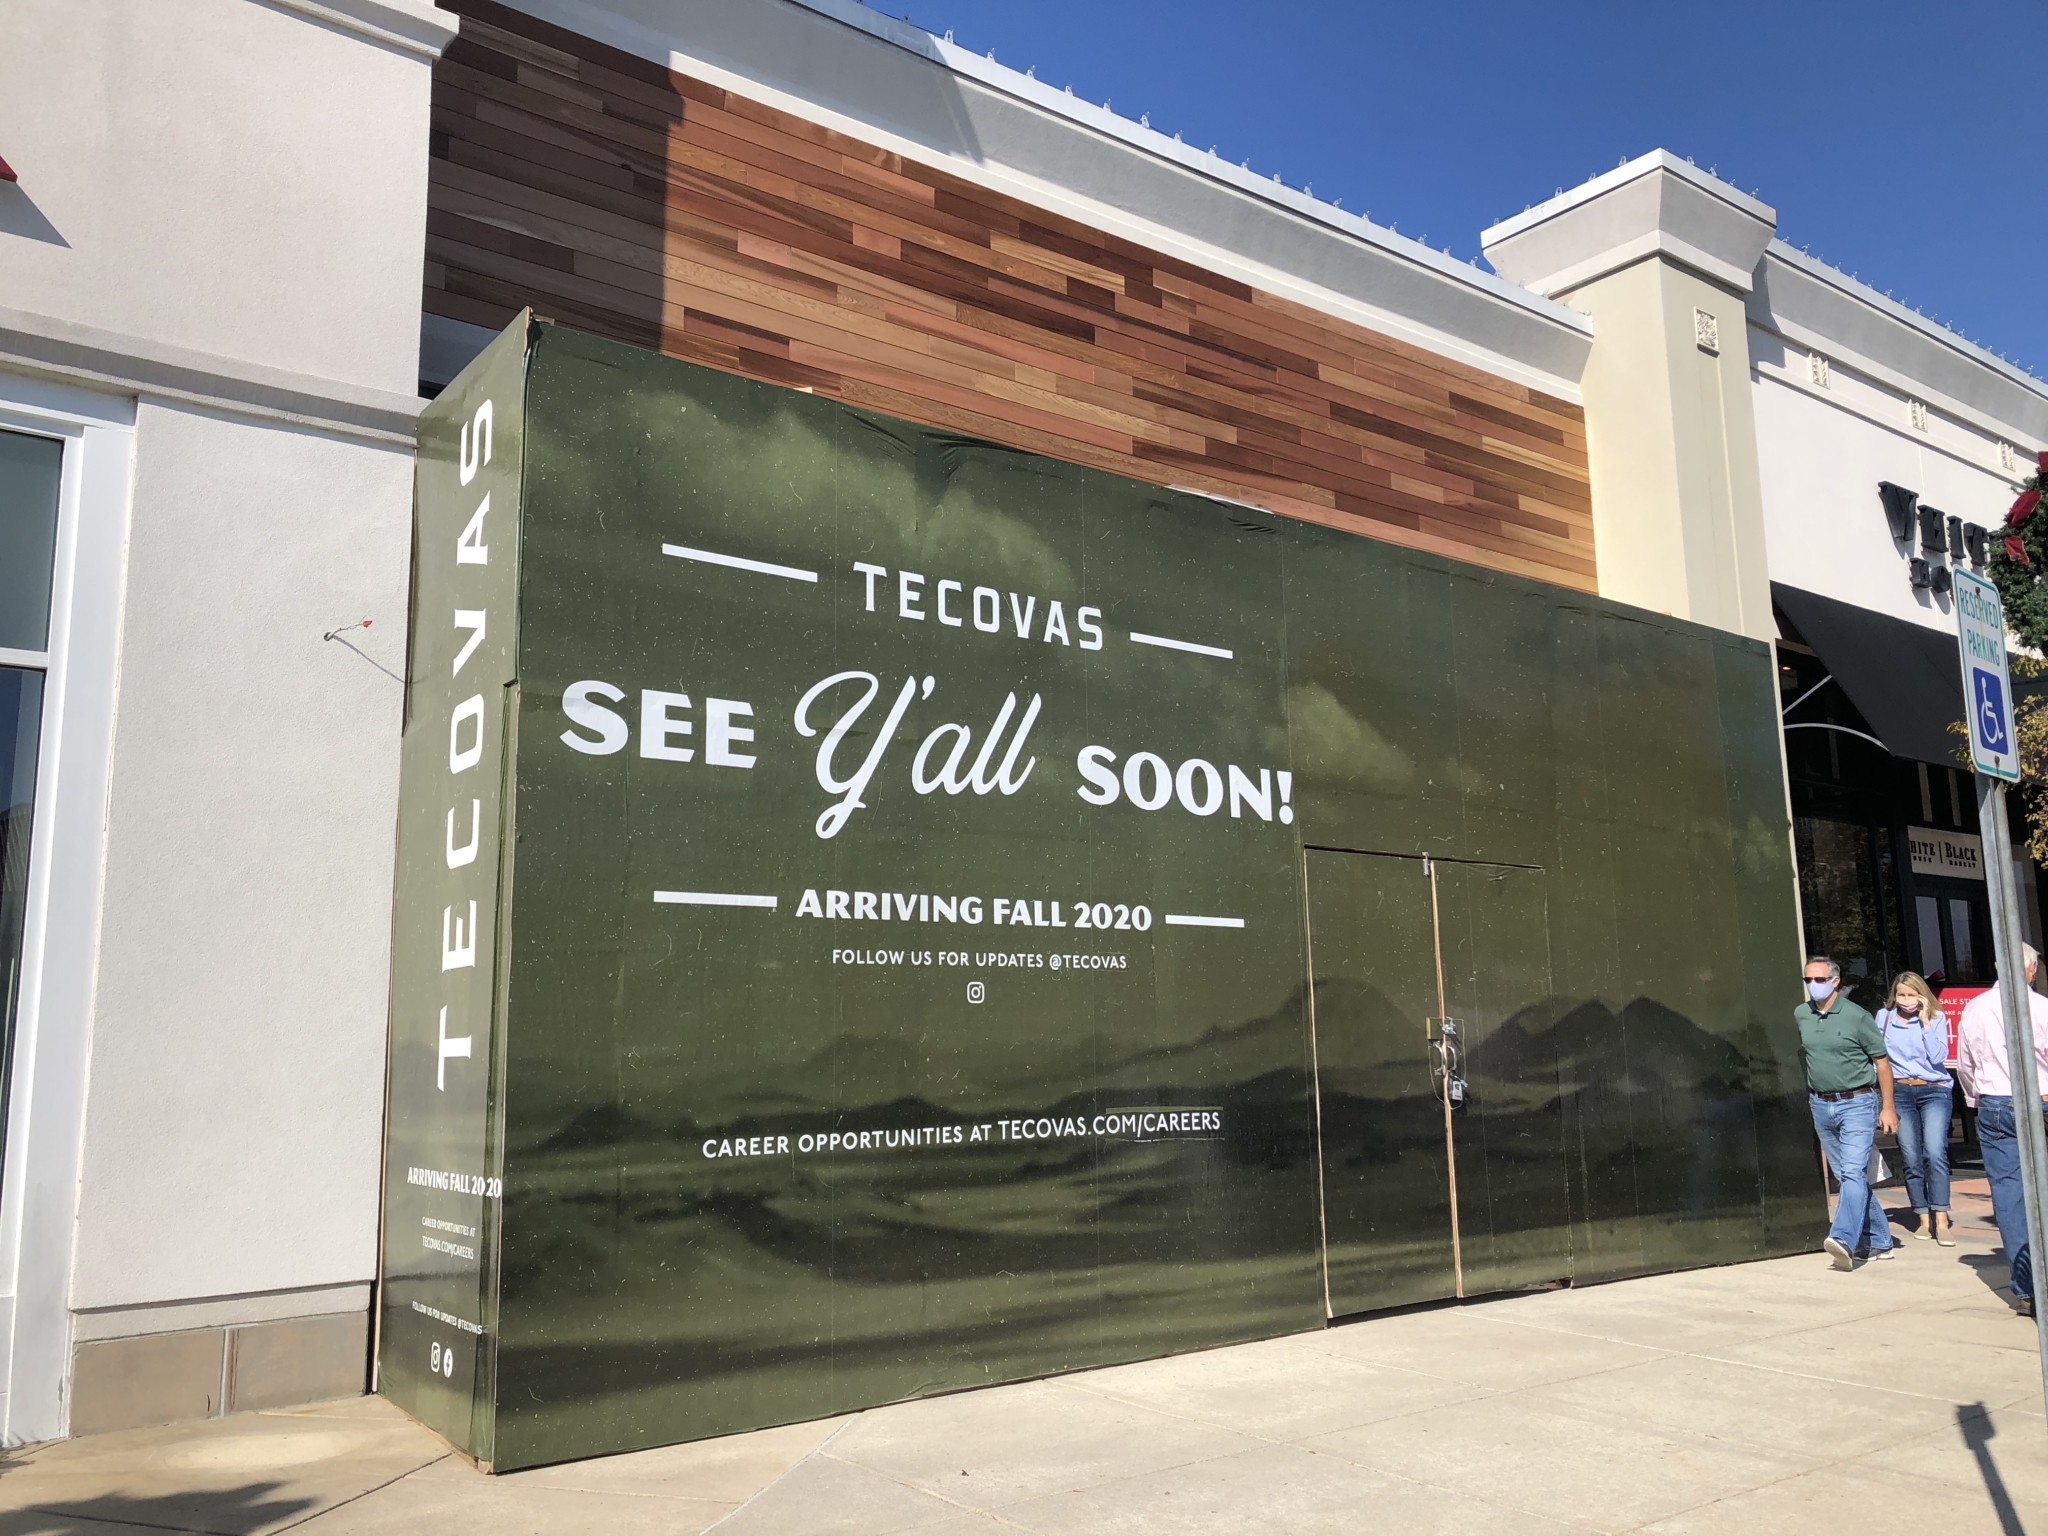 Tecovas Grand Opening Ghost Train's new location + more new shops & restaurants coming to Birmingham